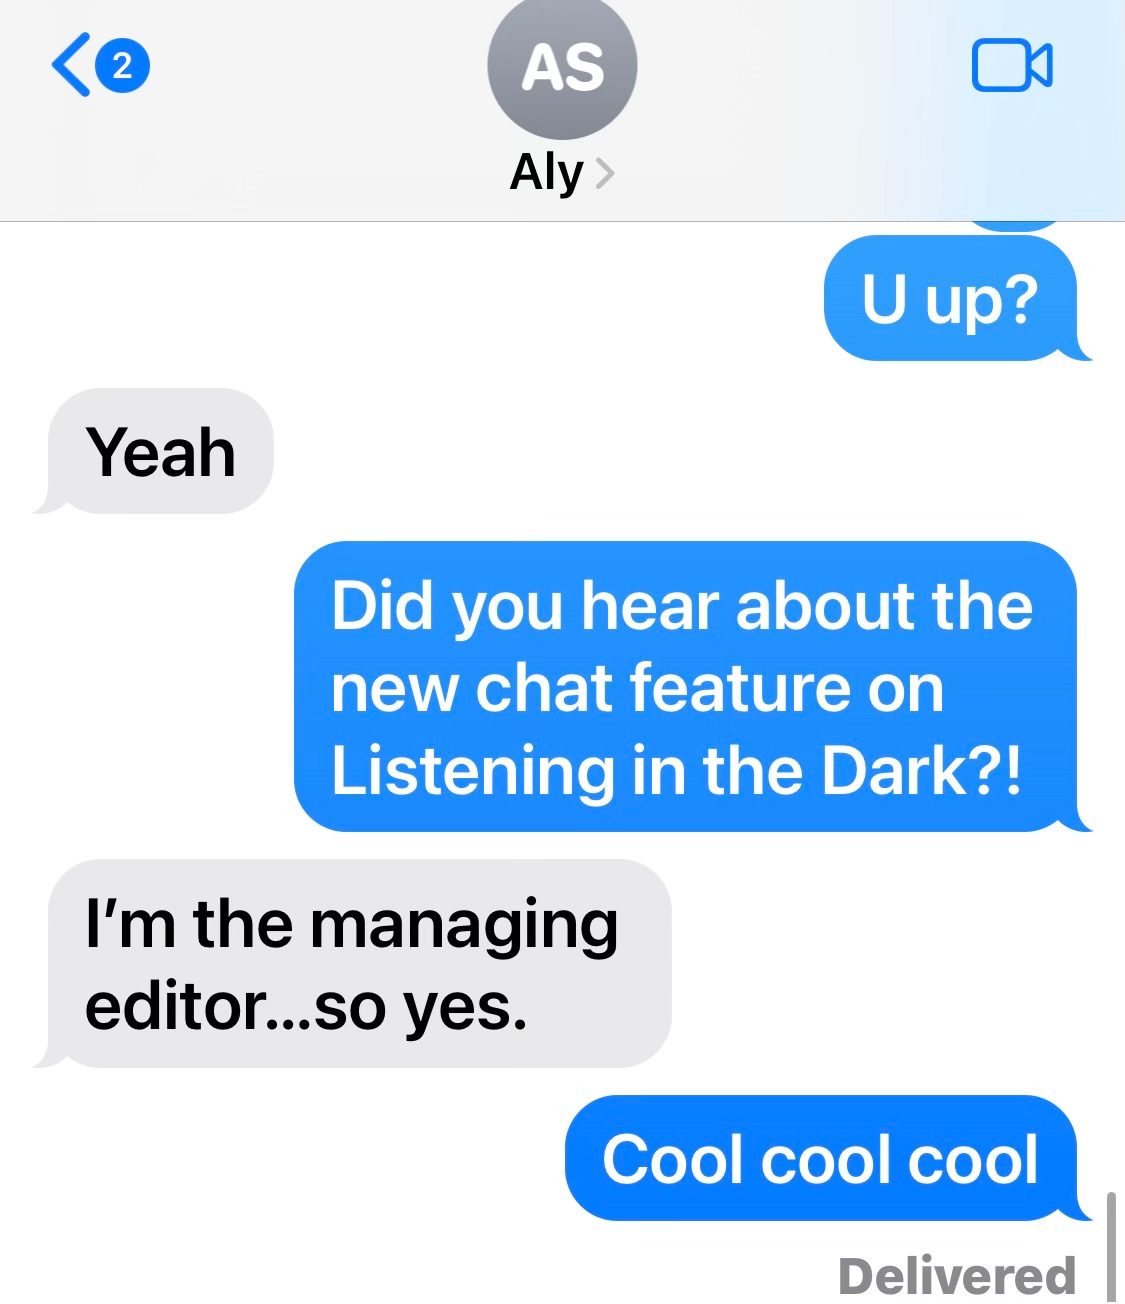 A screenshot of a text exchange between Amber Tamblyn and Aly Sarafa. || Amber: U up? / Aly: Yeah / Amber: Did you hear about the new chat feature on Listening in the Dark!? / Aly: I'm the managing editor...so yes. / Amber: Cool cool cool.